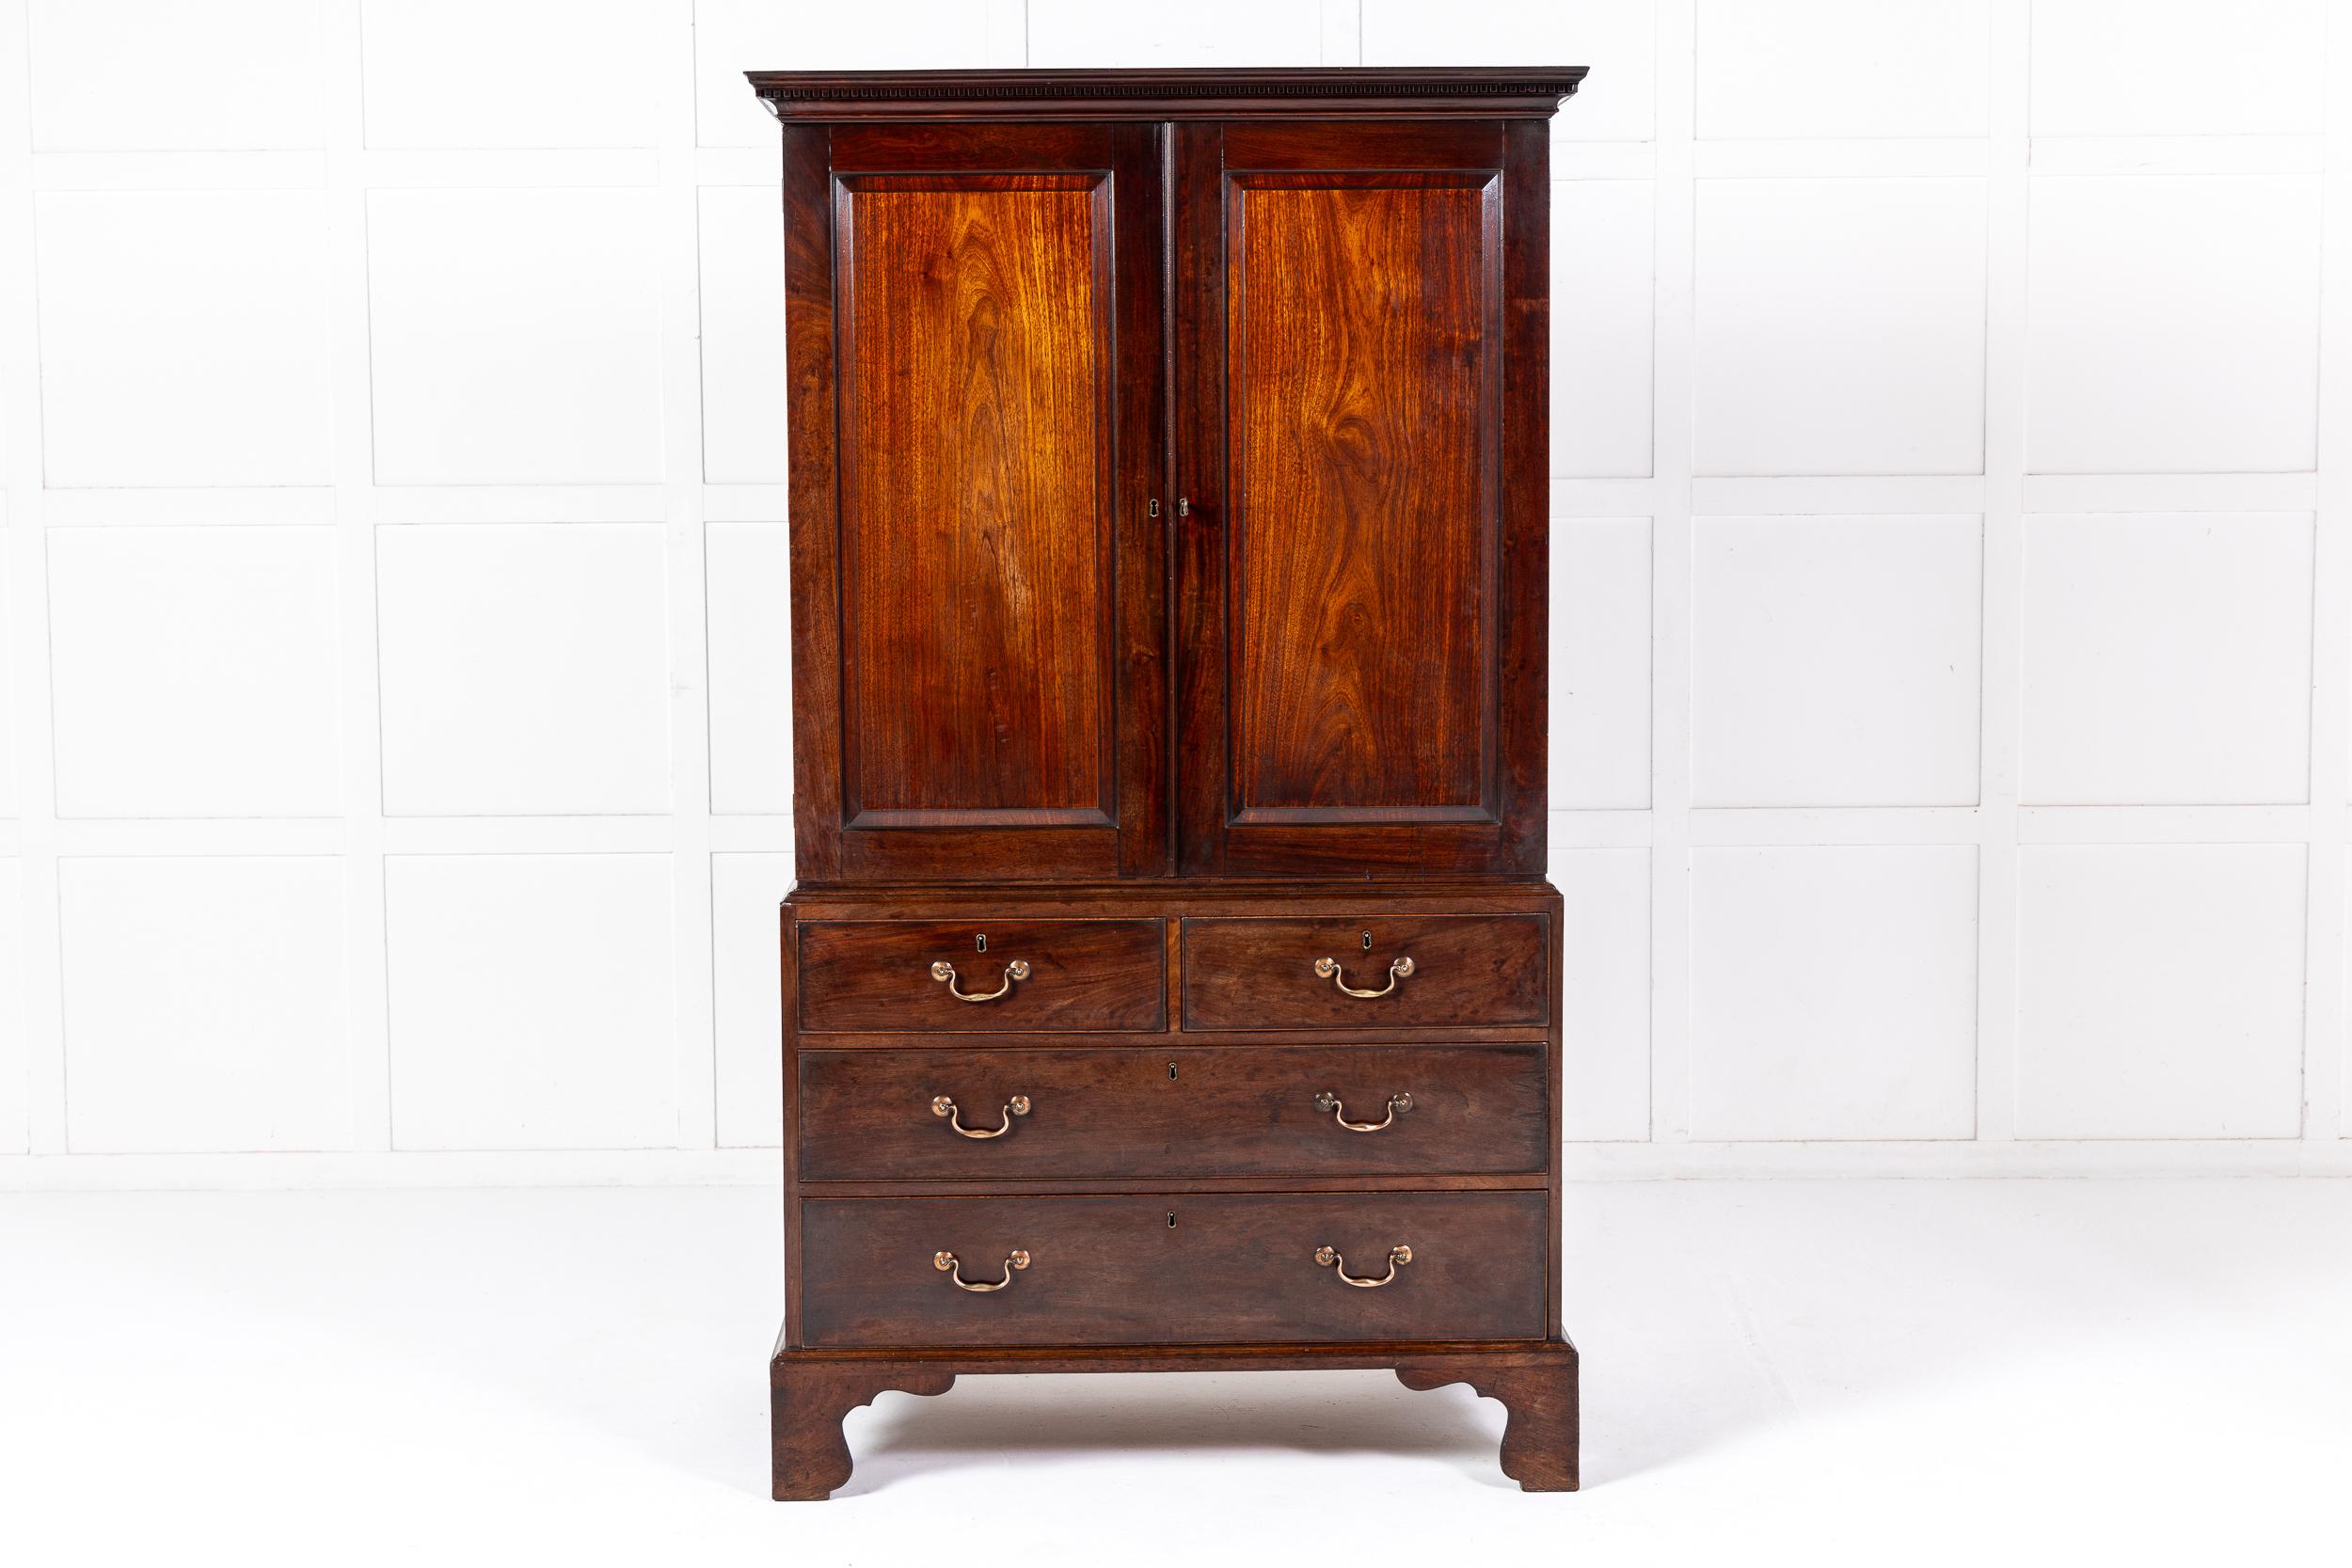 A Very Fine Mid 18th Century English Mahogany Linen Press of Desirable Small Size.

Of extremely fine proportions, this beautiful linen press or wardrobe is of unusually small and desirable size but with the depth one would expect from any piece of